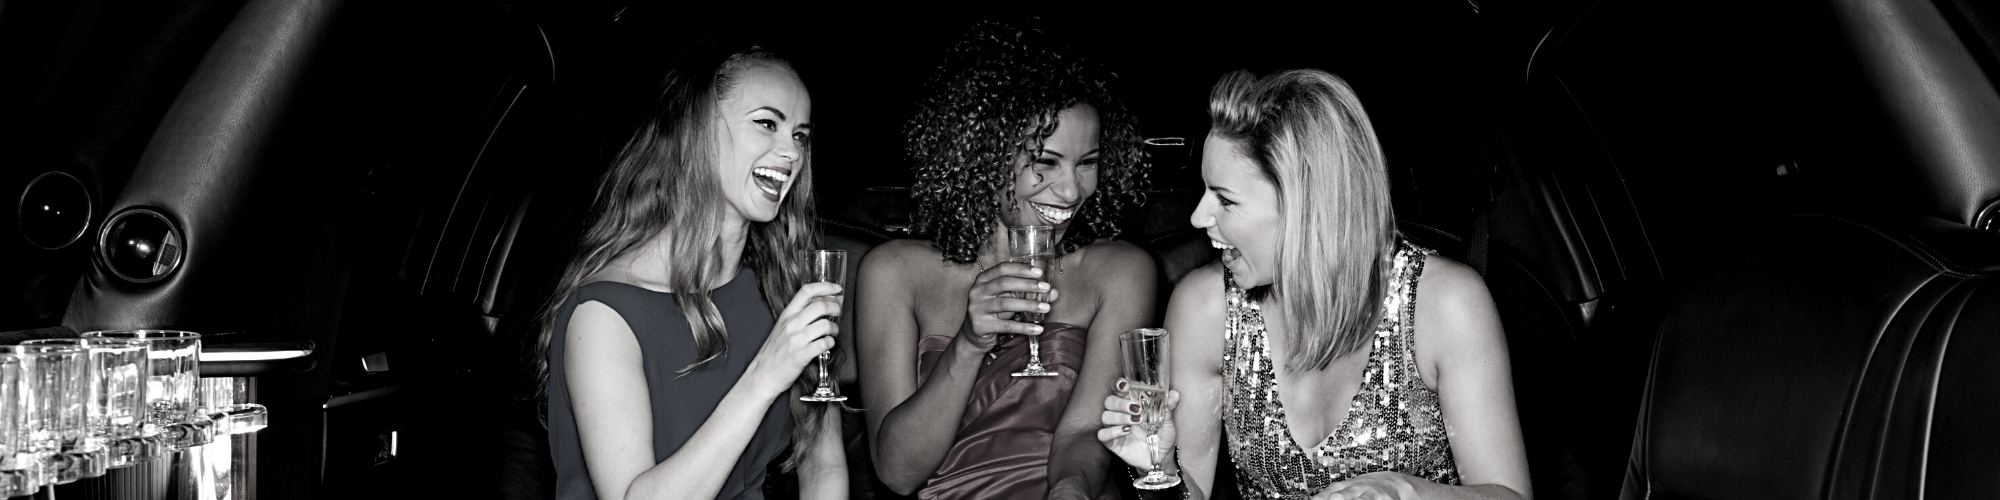 girls having drinks in a limo 